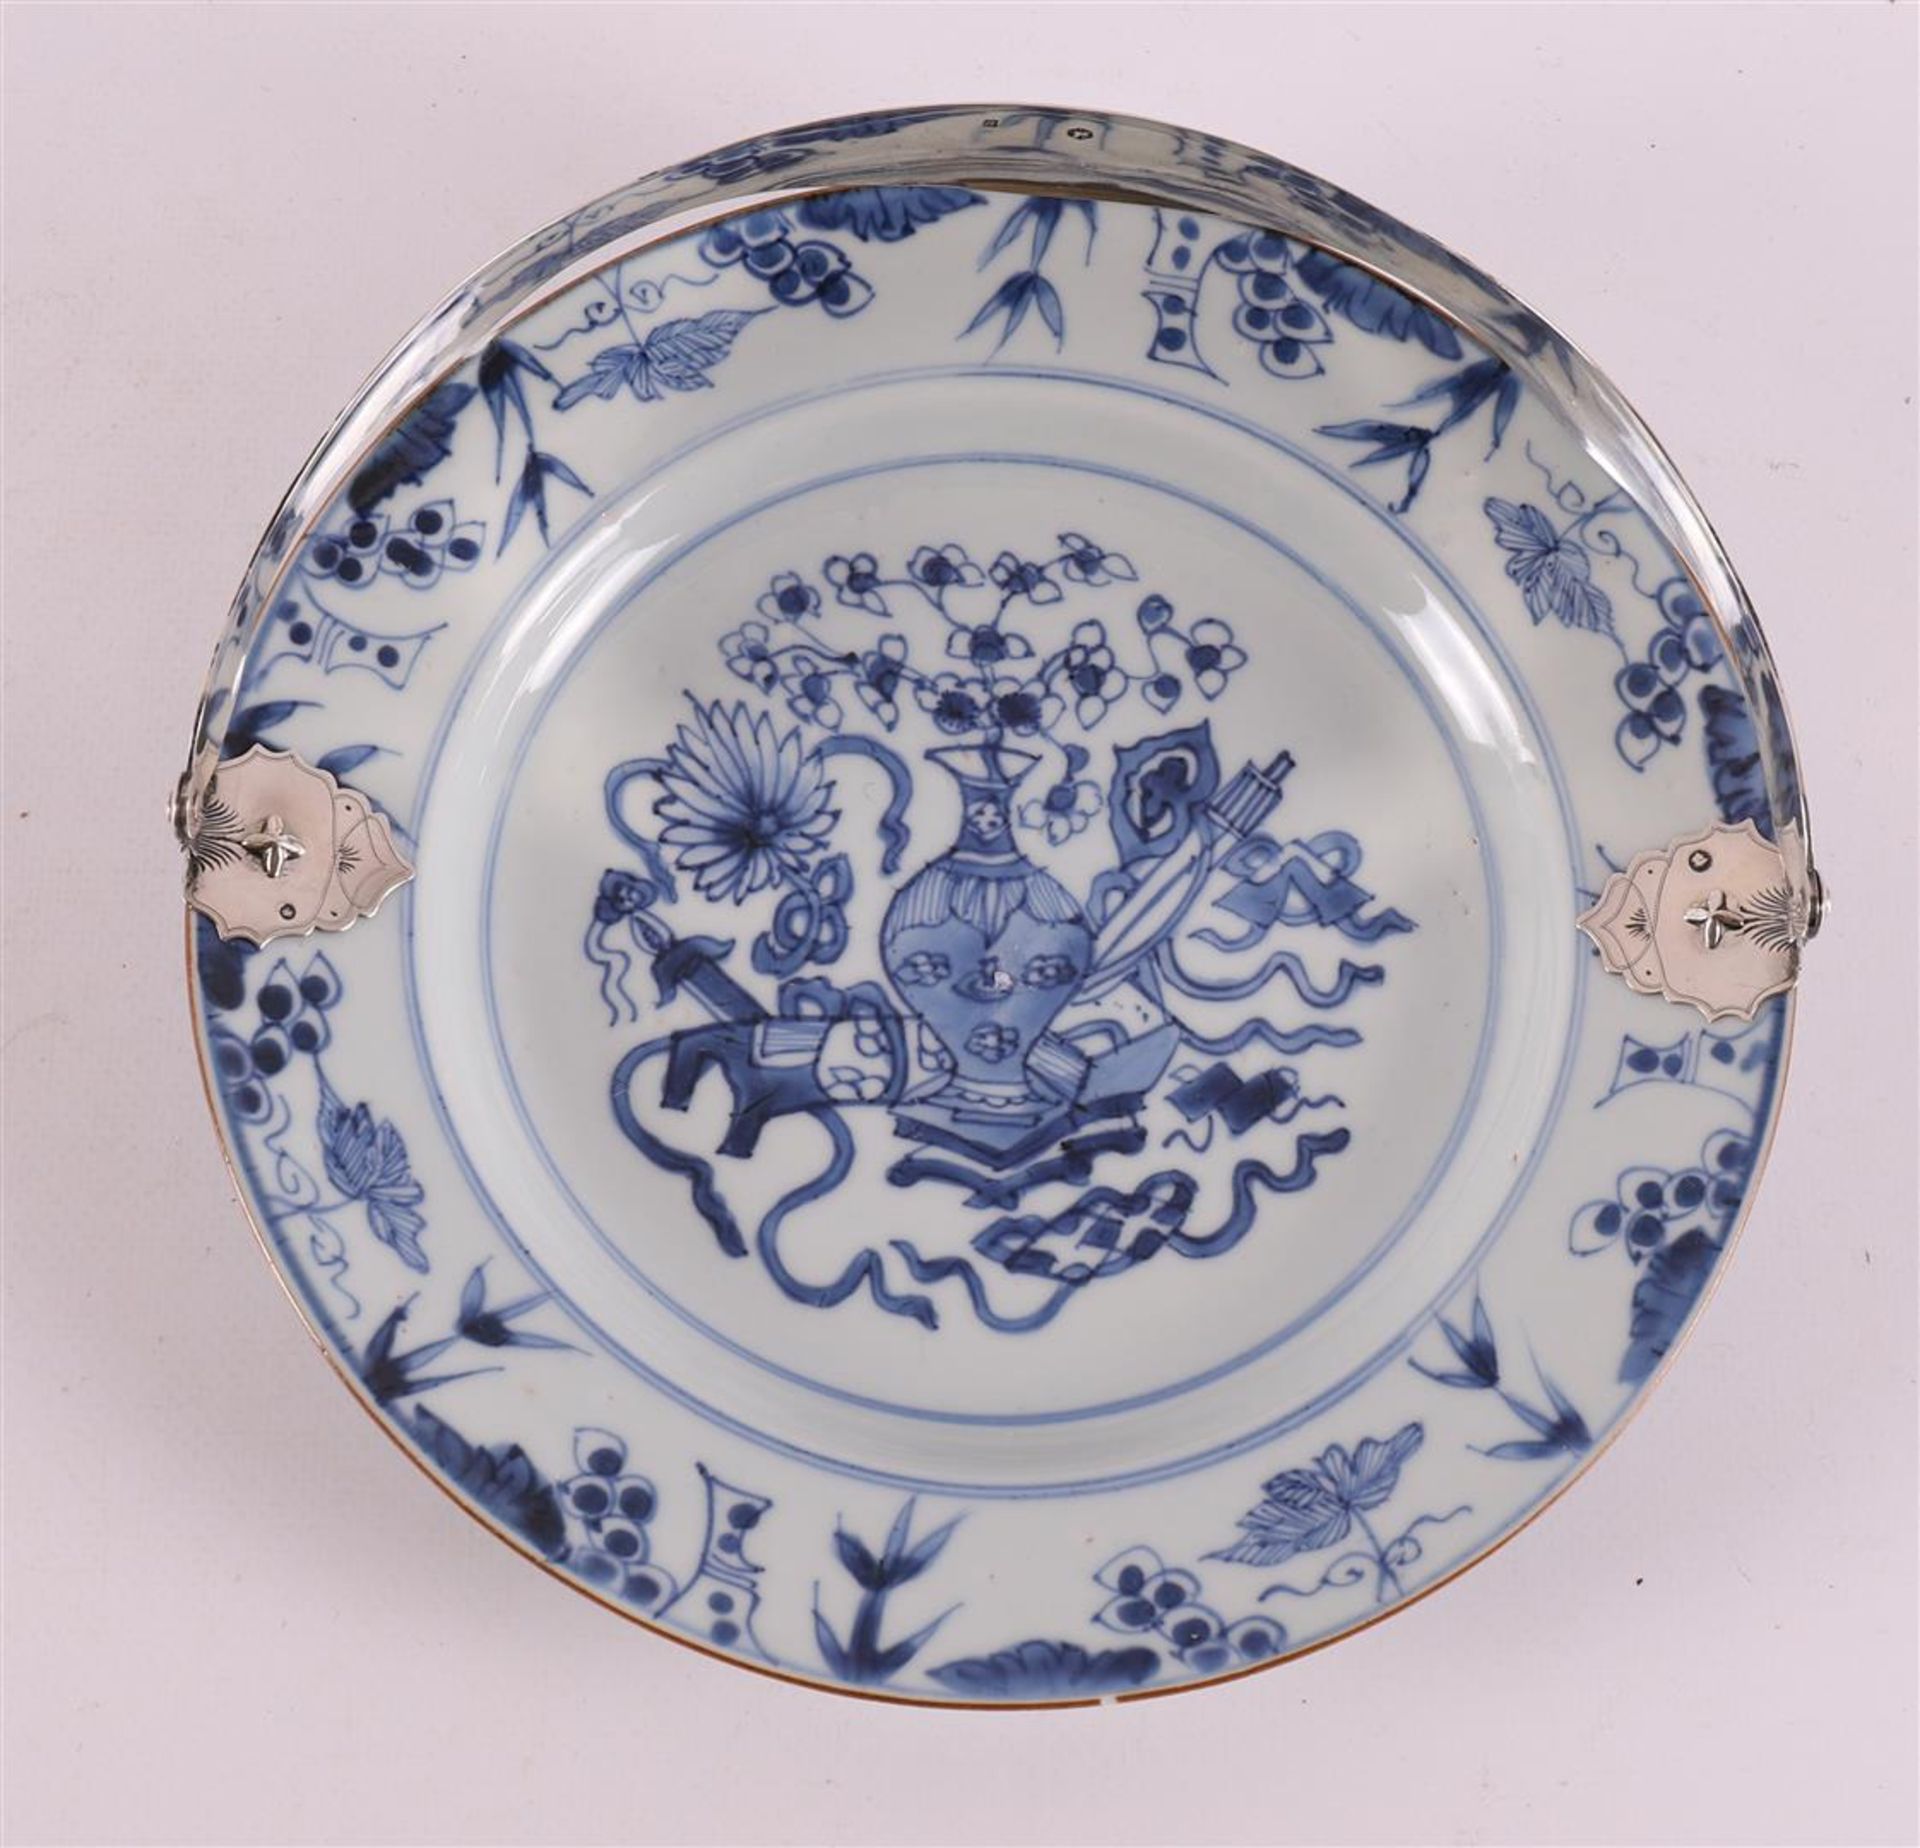 A blue/white porcelain plate with a silver handle from a later date, China, Kang - Image 2 of 5